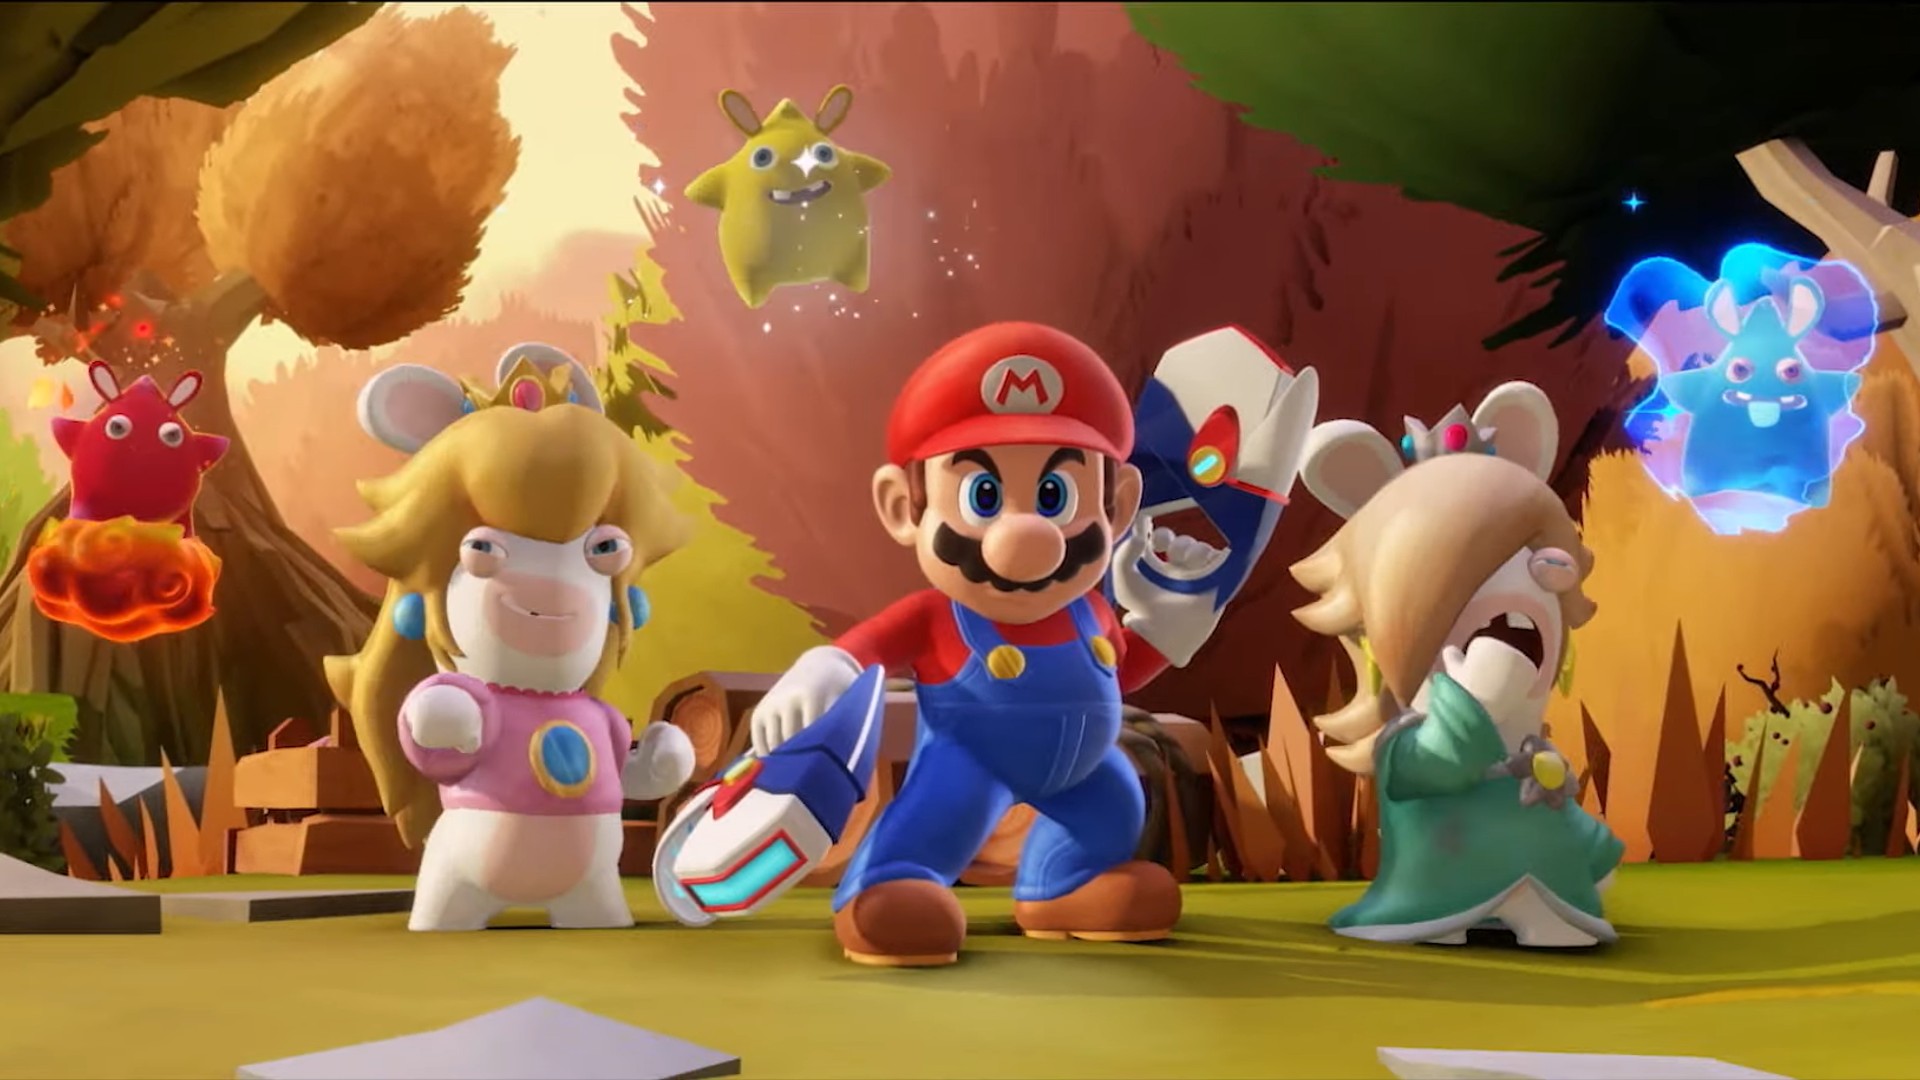 New Mario + Rabbids: Sparks of Hope trailer shows off turn-based combat,  Bowser, and an official release date